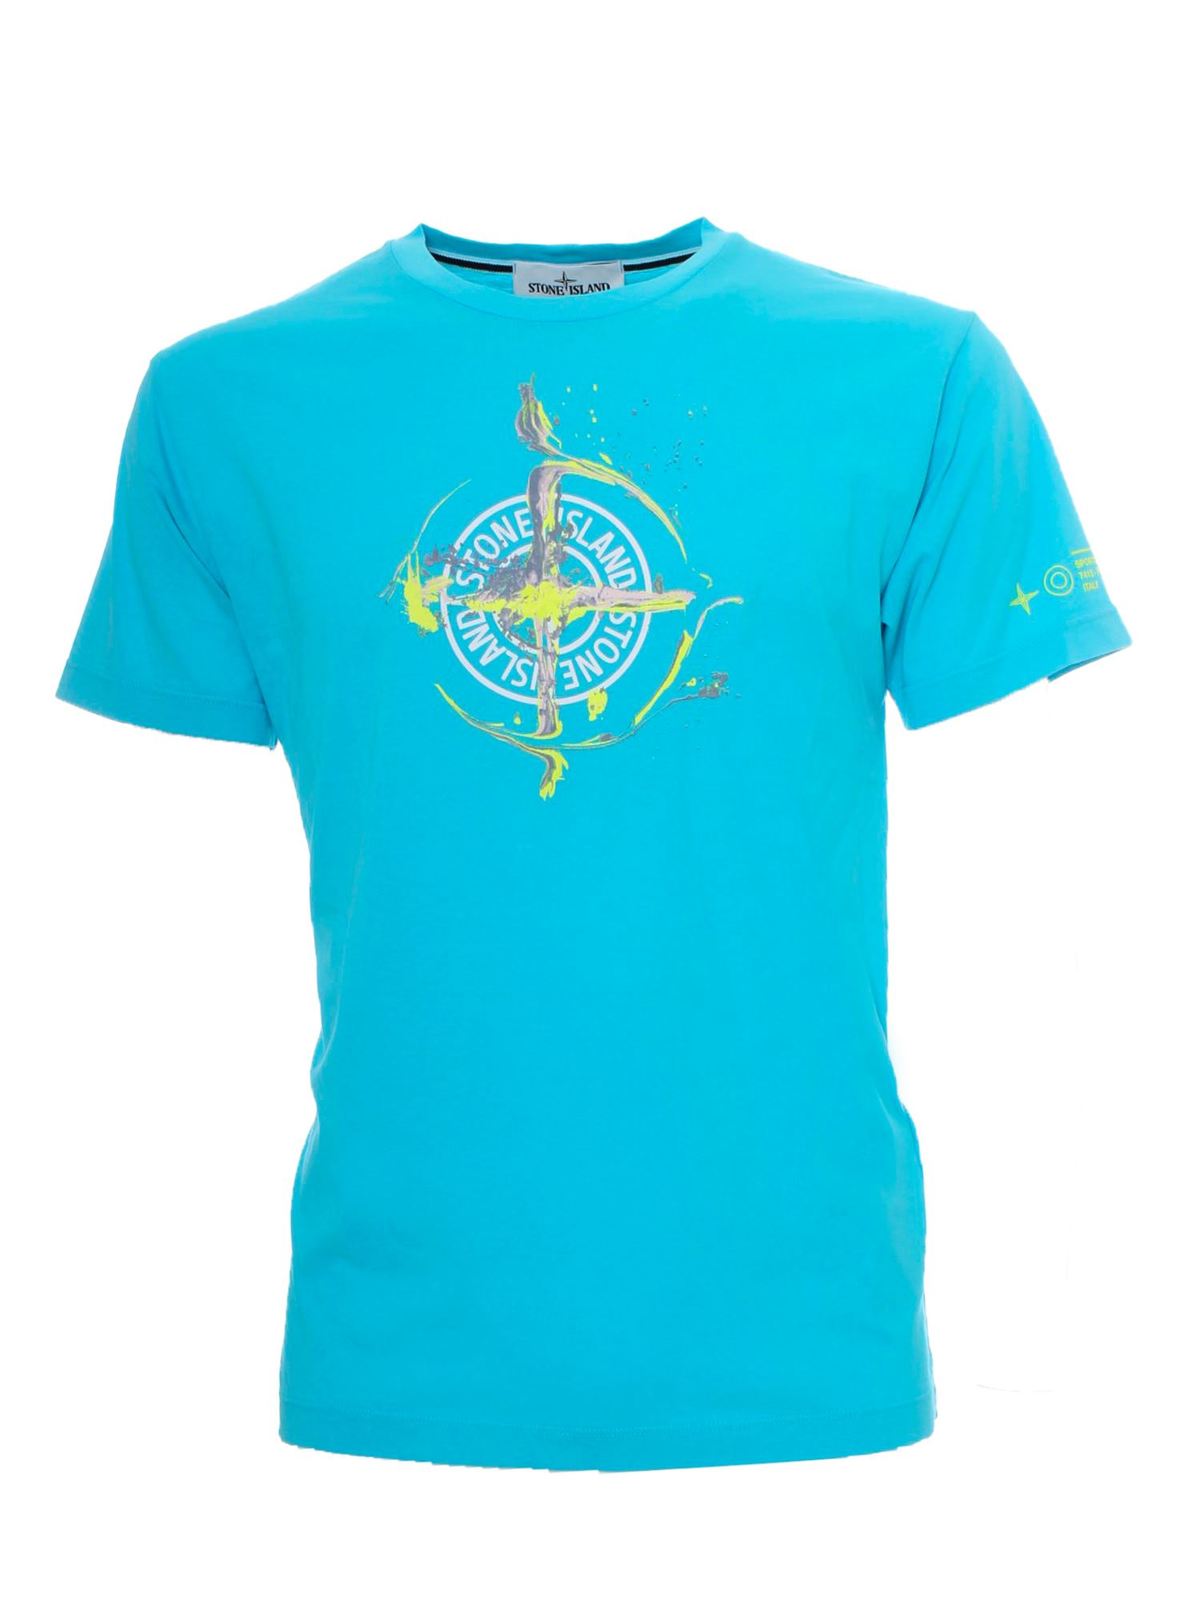 STONE ISLAND FRONT BRANDED T-SHIRT IN TURQUOISE